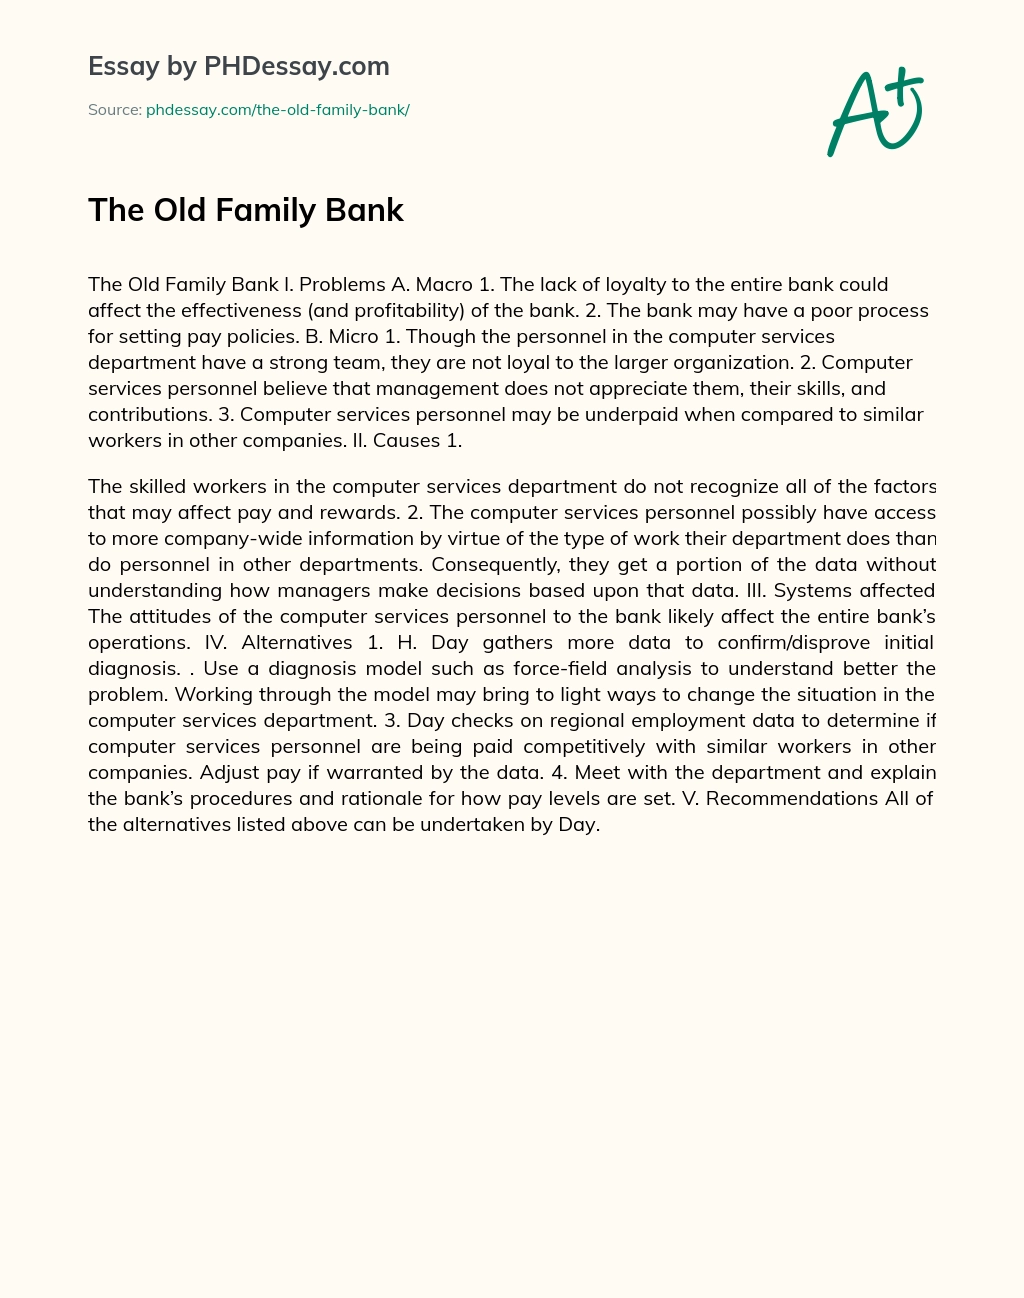 The Old Family Bank essay